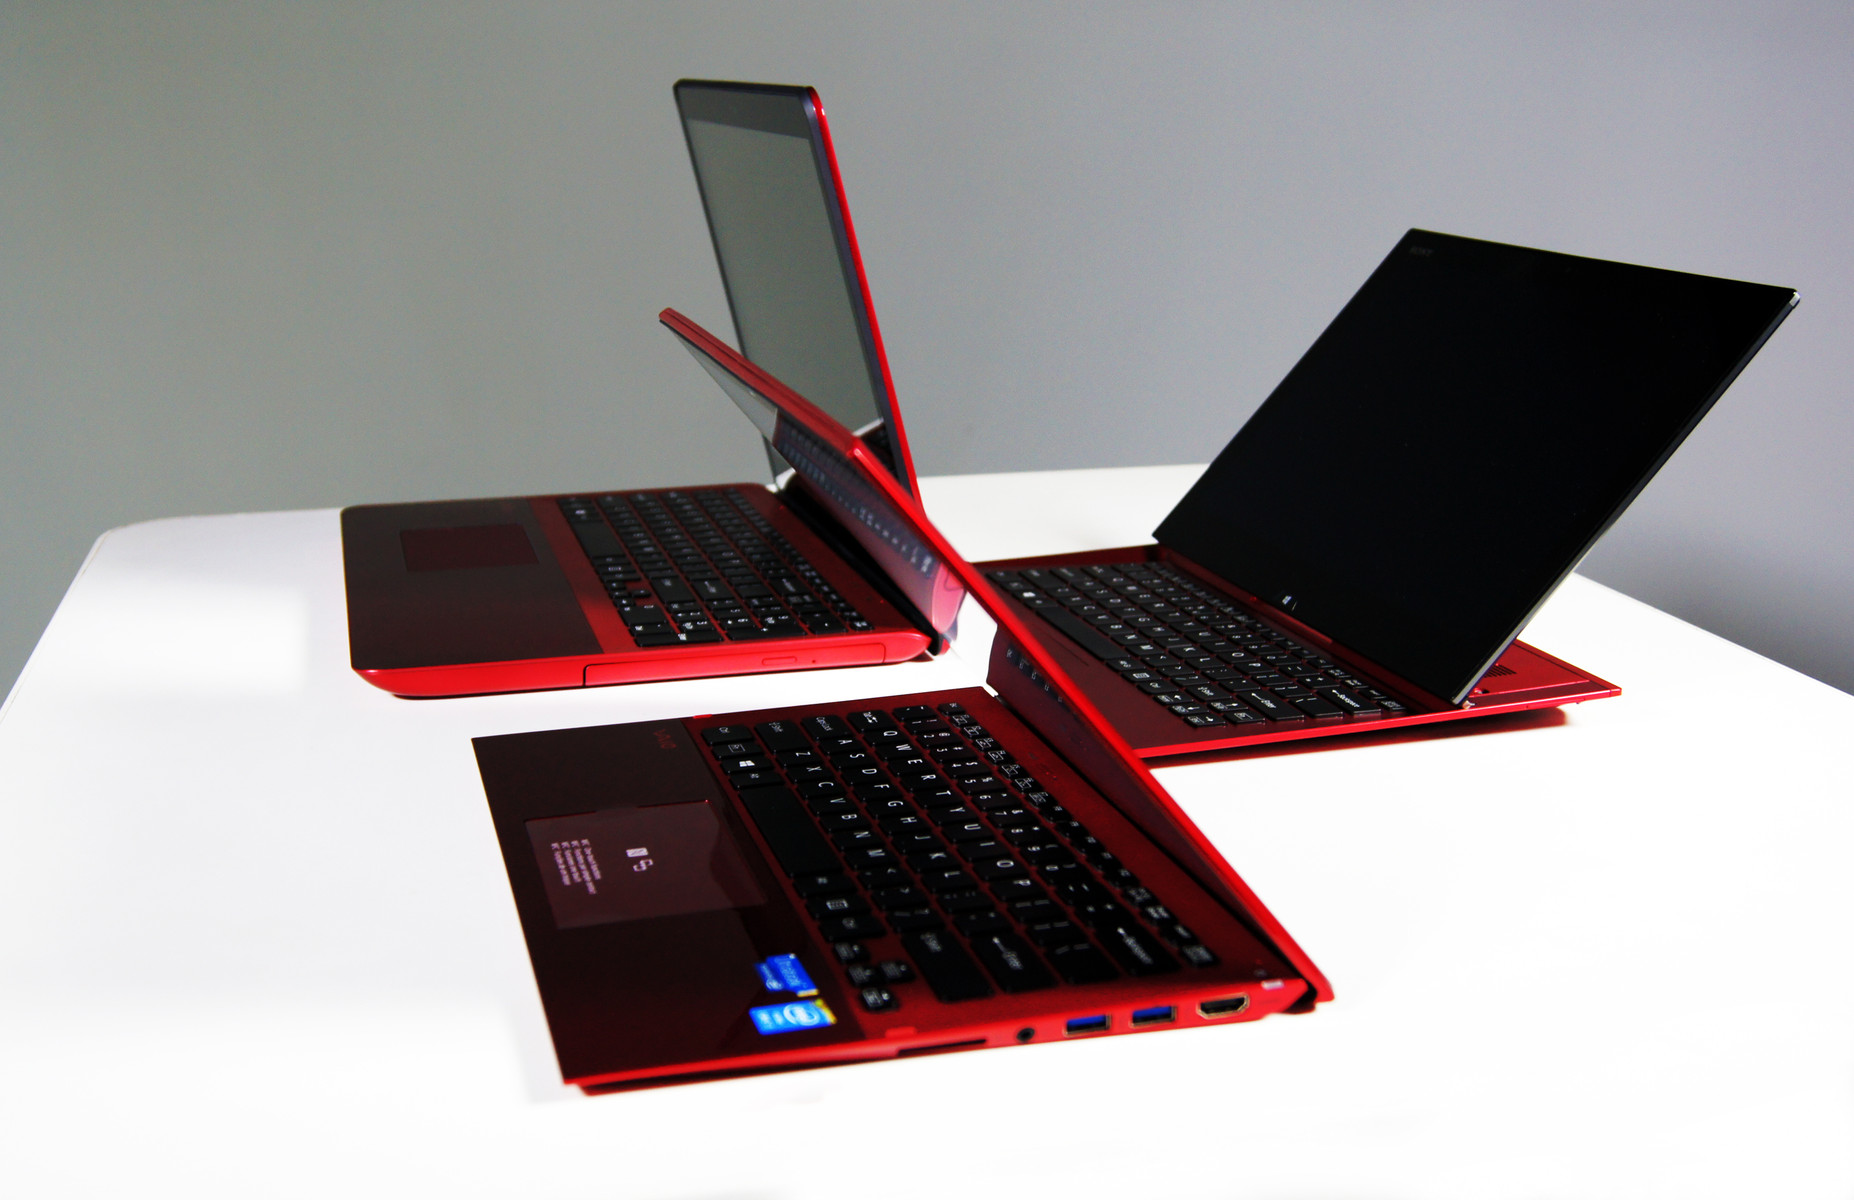 Sony releases the luxury VAIO | Red Edition - NotebookCheck